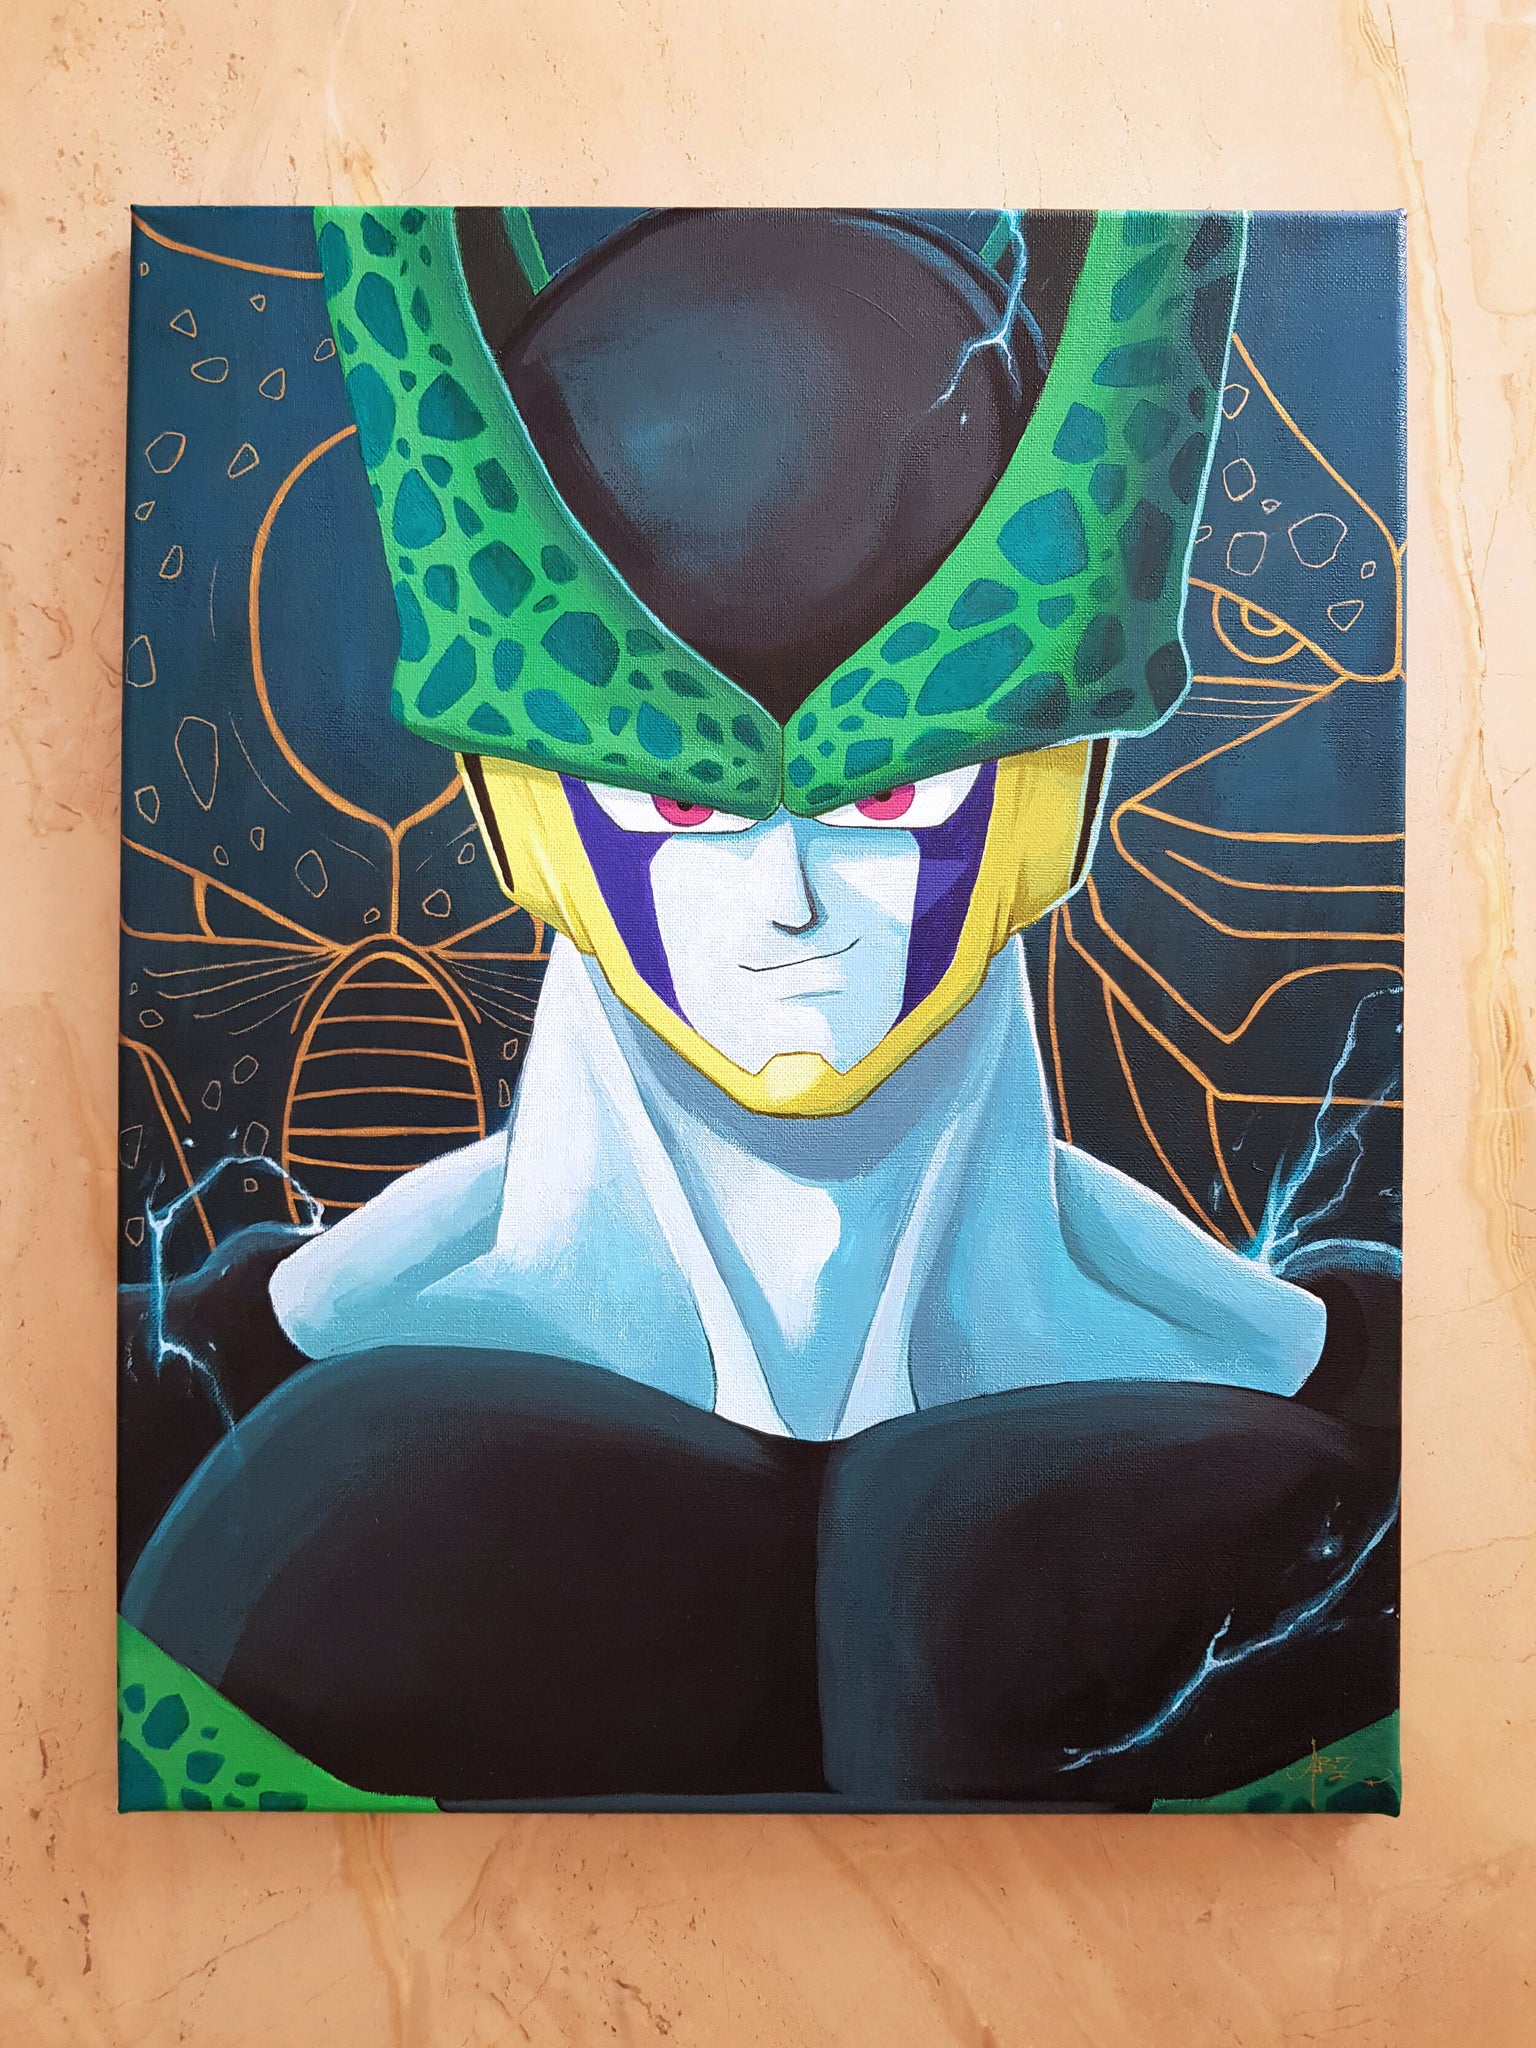 "CELL" - Original Painting (15.8" x 19.7")